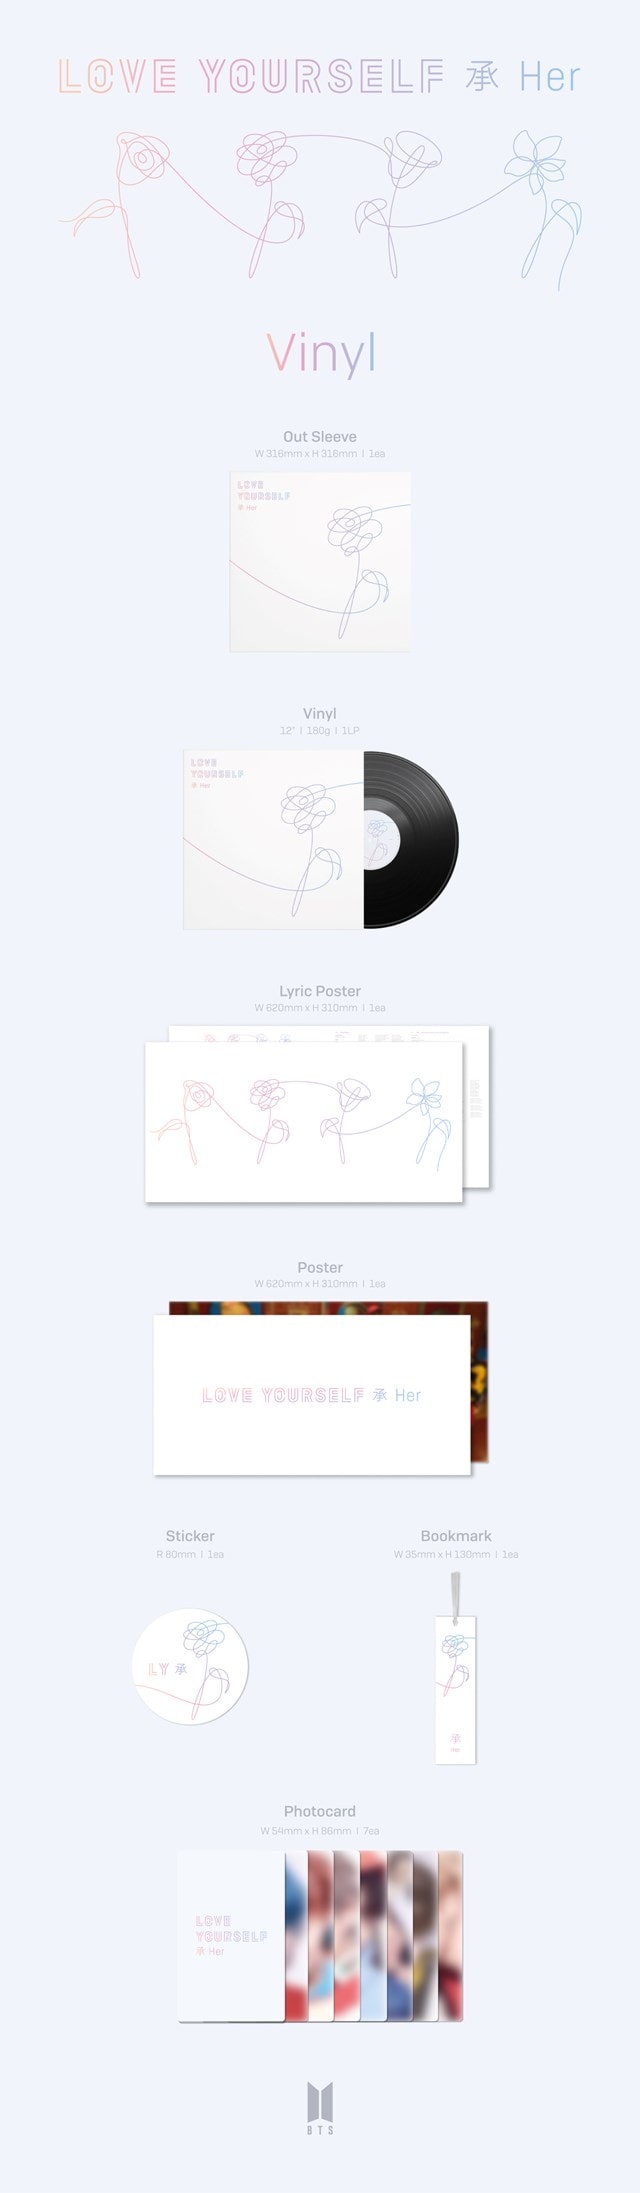 LOVE YOURSELF: Her - 2